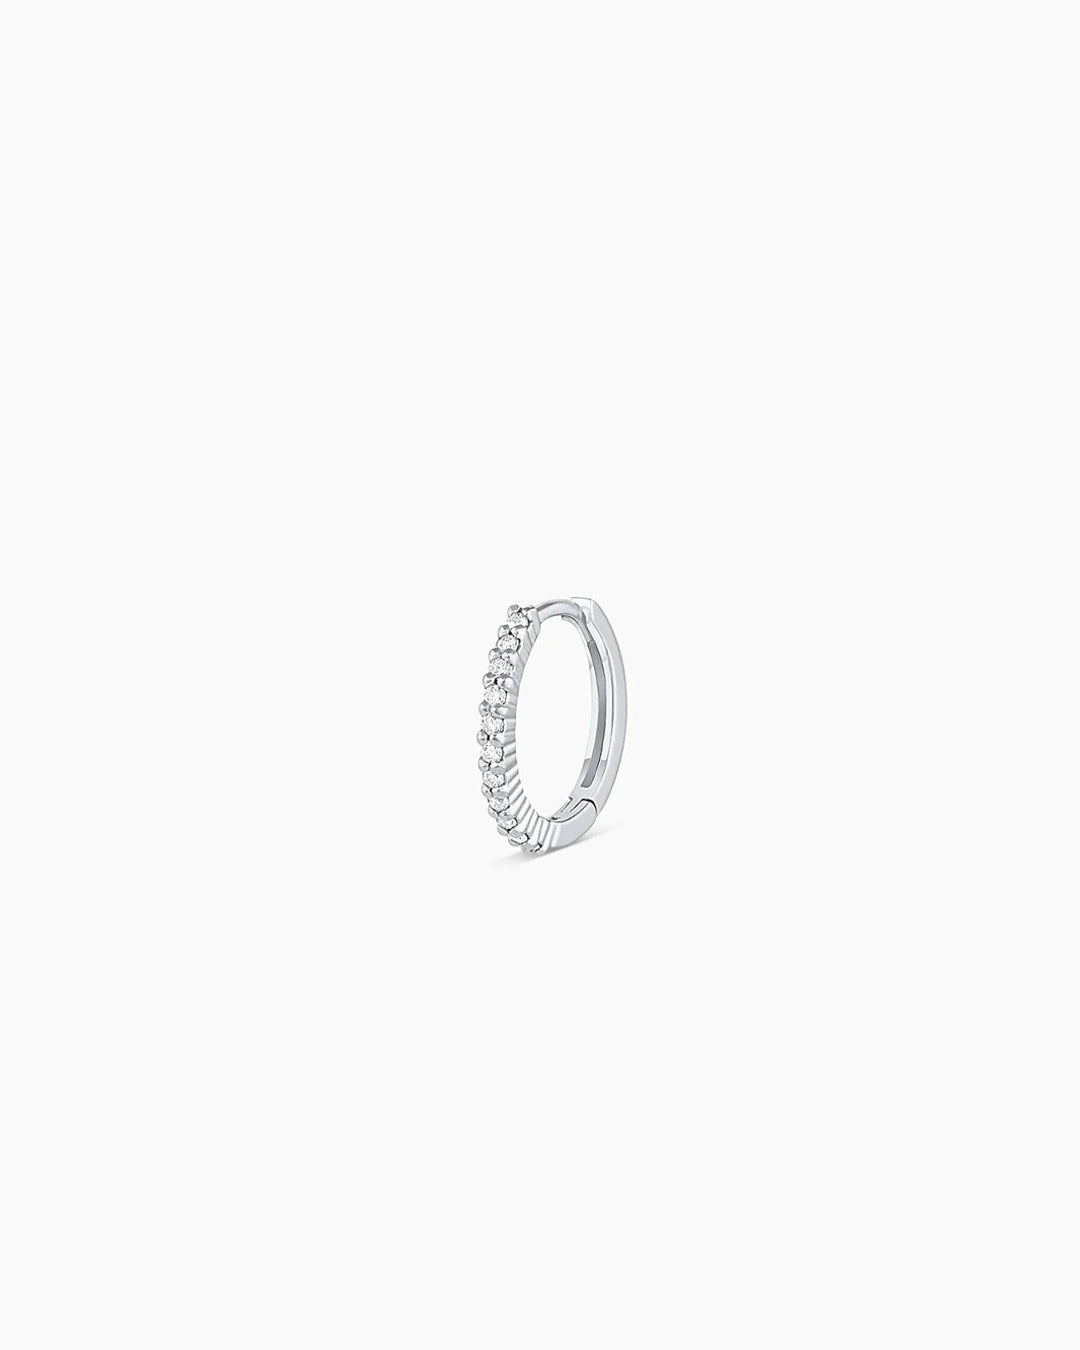 Woman wearing Classic Gold Huggie || option::14k Solid White Gold, 11mm, Single